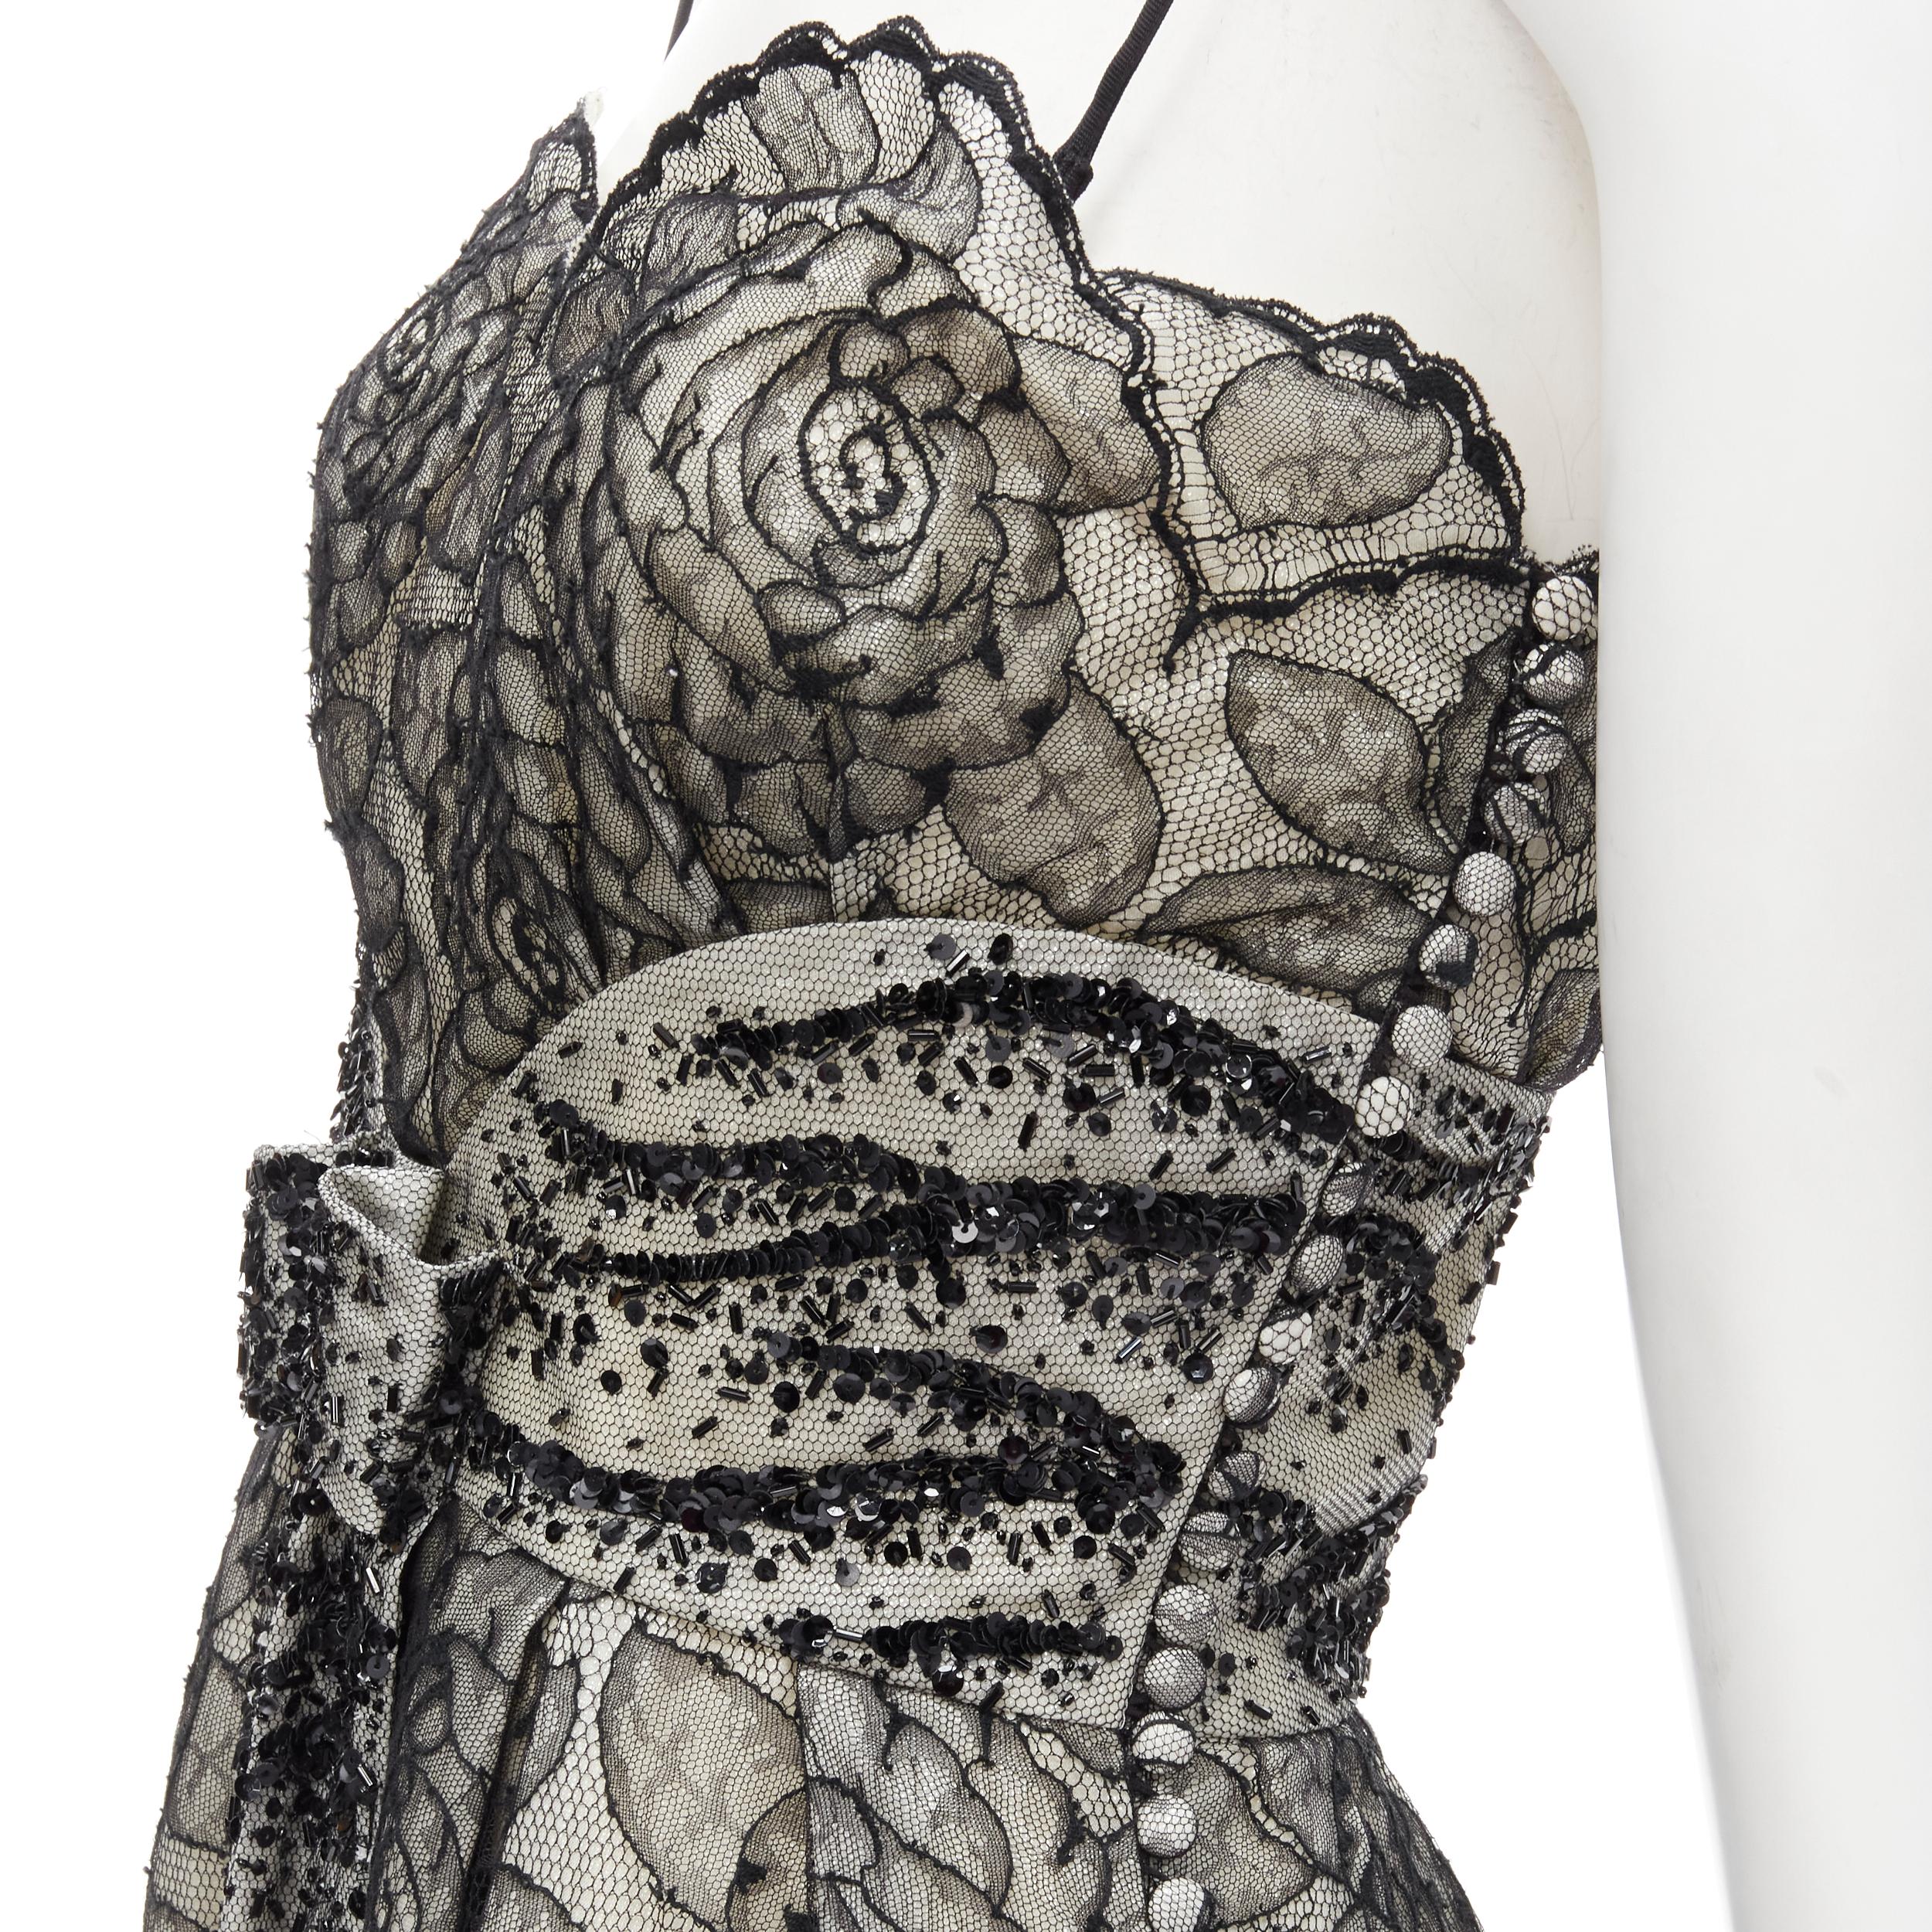 CHRISTIAN DIOR JOHN GALLIANO 2011 Runway lace bead embellished bow dress FR36 S 
Reference: TGAS/C01236 
Brand: Christian Dior 
Designer: John Galliano 
Collection: Resort 2011 Runway 
Material: Cotton 
Color: Cream 
Pattern: Lace 
Closure: Button